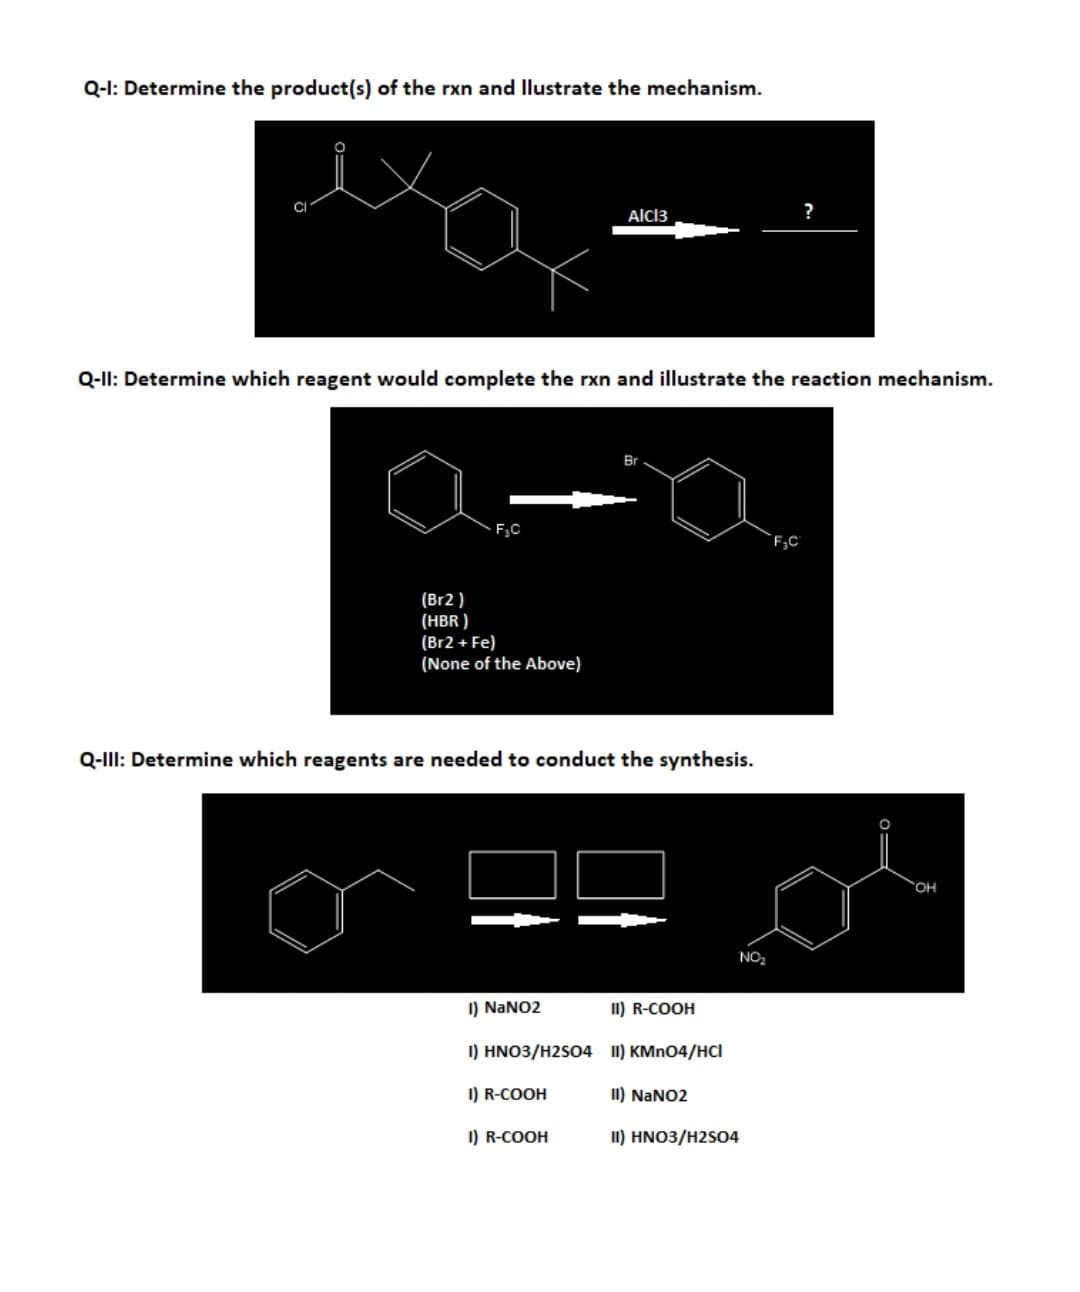 Q-I: Determine the product(s) of the rxn and llustrate the mechanism.
AlCl3
?
Q-II: Determine which reagent would complete the rxn and illustrate the reaction mechanism.
F3C
F;C
(Br2 )
(HBR )
(Br2 + Fe)
(None of the Above)
Q-III: Determine which reagents are needed to conduct the synthesis.
OH
NO,
1) NANO2
II) R-COOH
I) HNO3/H2SO4 II) KMN04/HCI
I) R-COOH
II) NANO2
1) R-COOH
II) HNO3/H2S04
